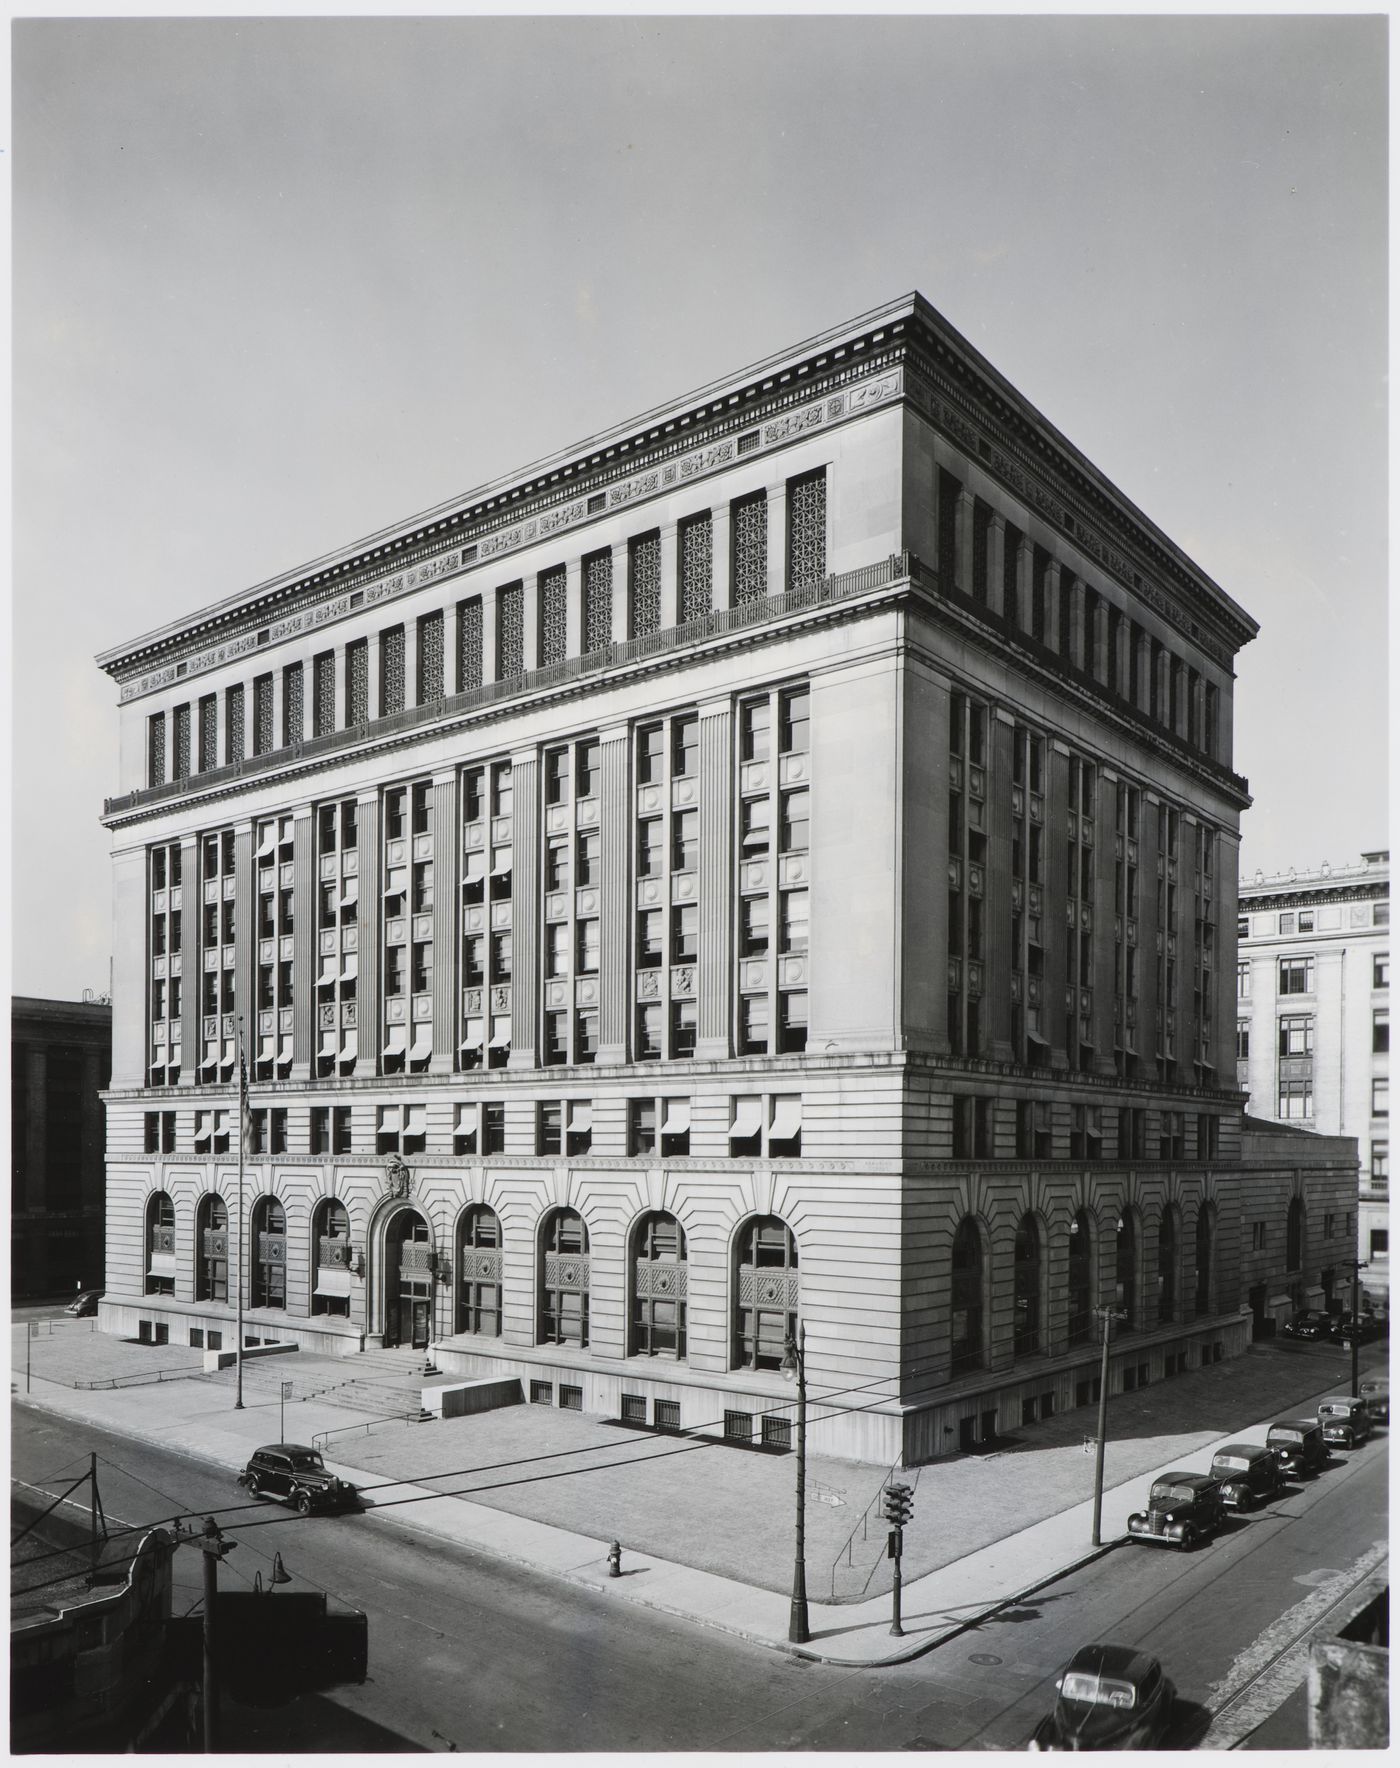 View of principal and lateral façades of the Police Headquarters, Detroit, Michigan